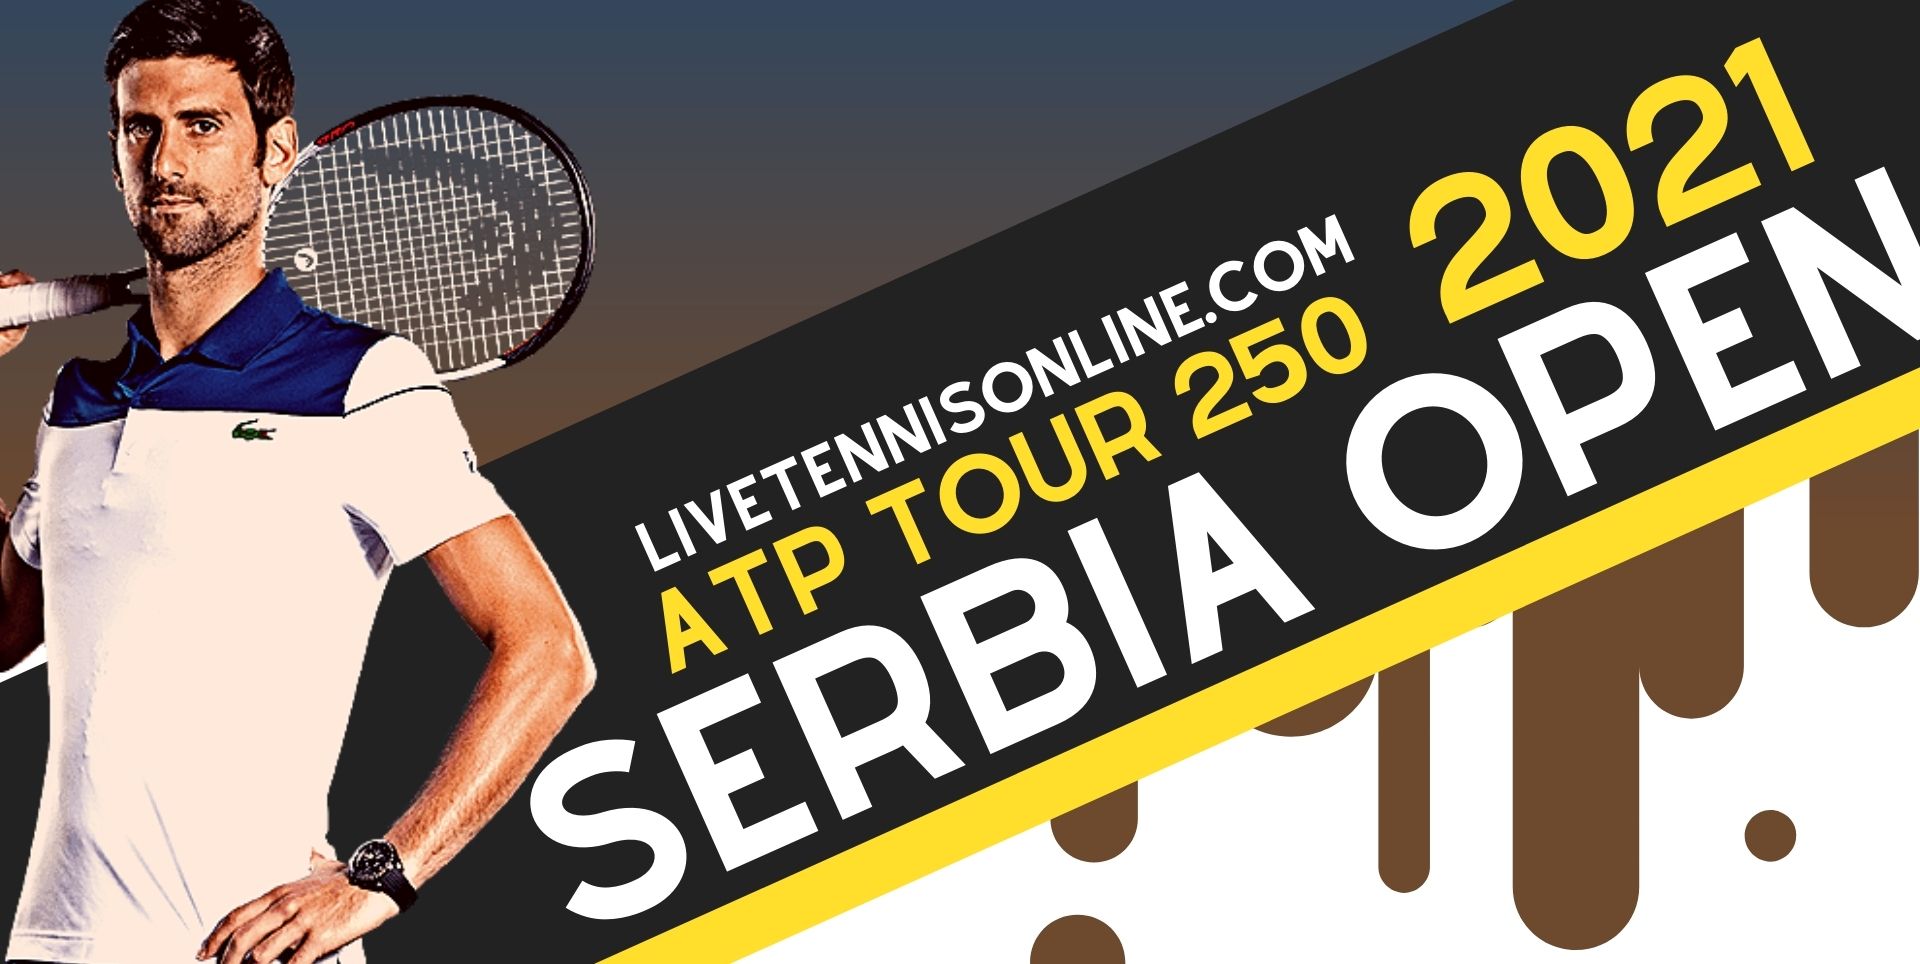 serbia-open-live-streaming